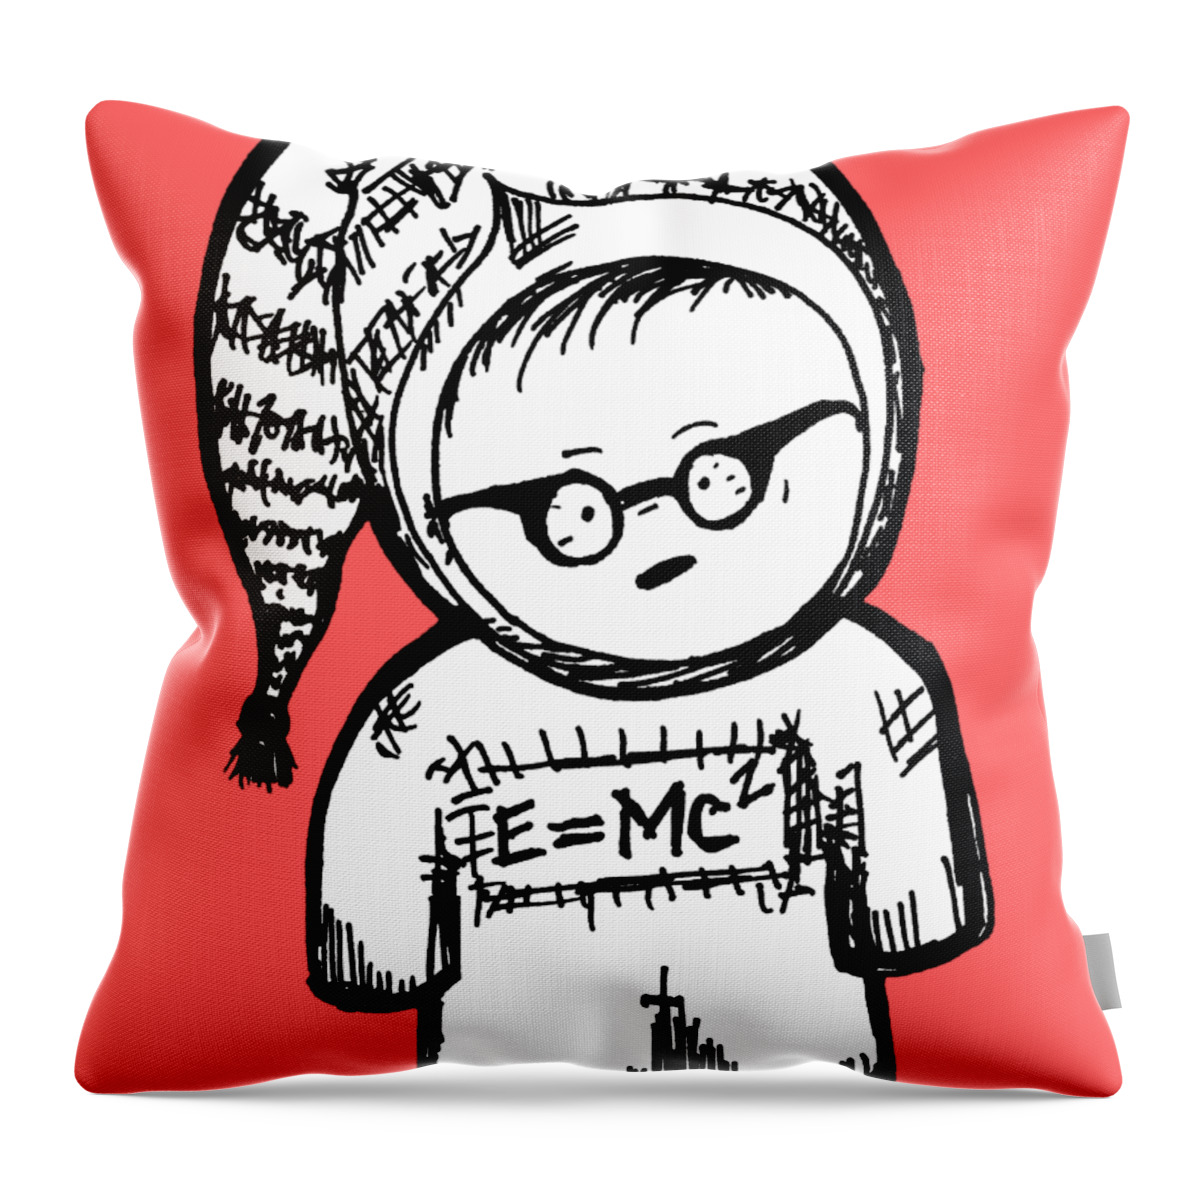 Grumpypants Throw Pillow featuring the drawing Smartypants by Unhinged Artistry